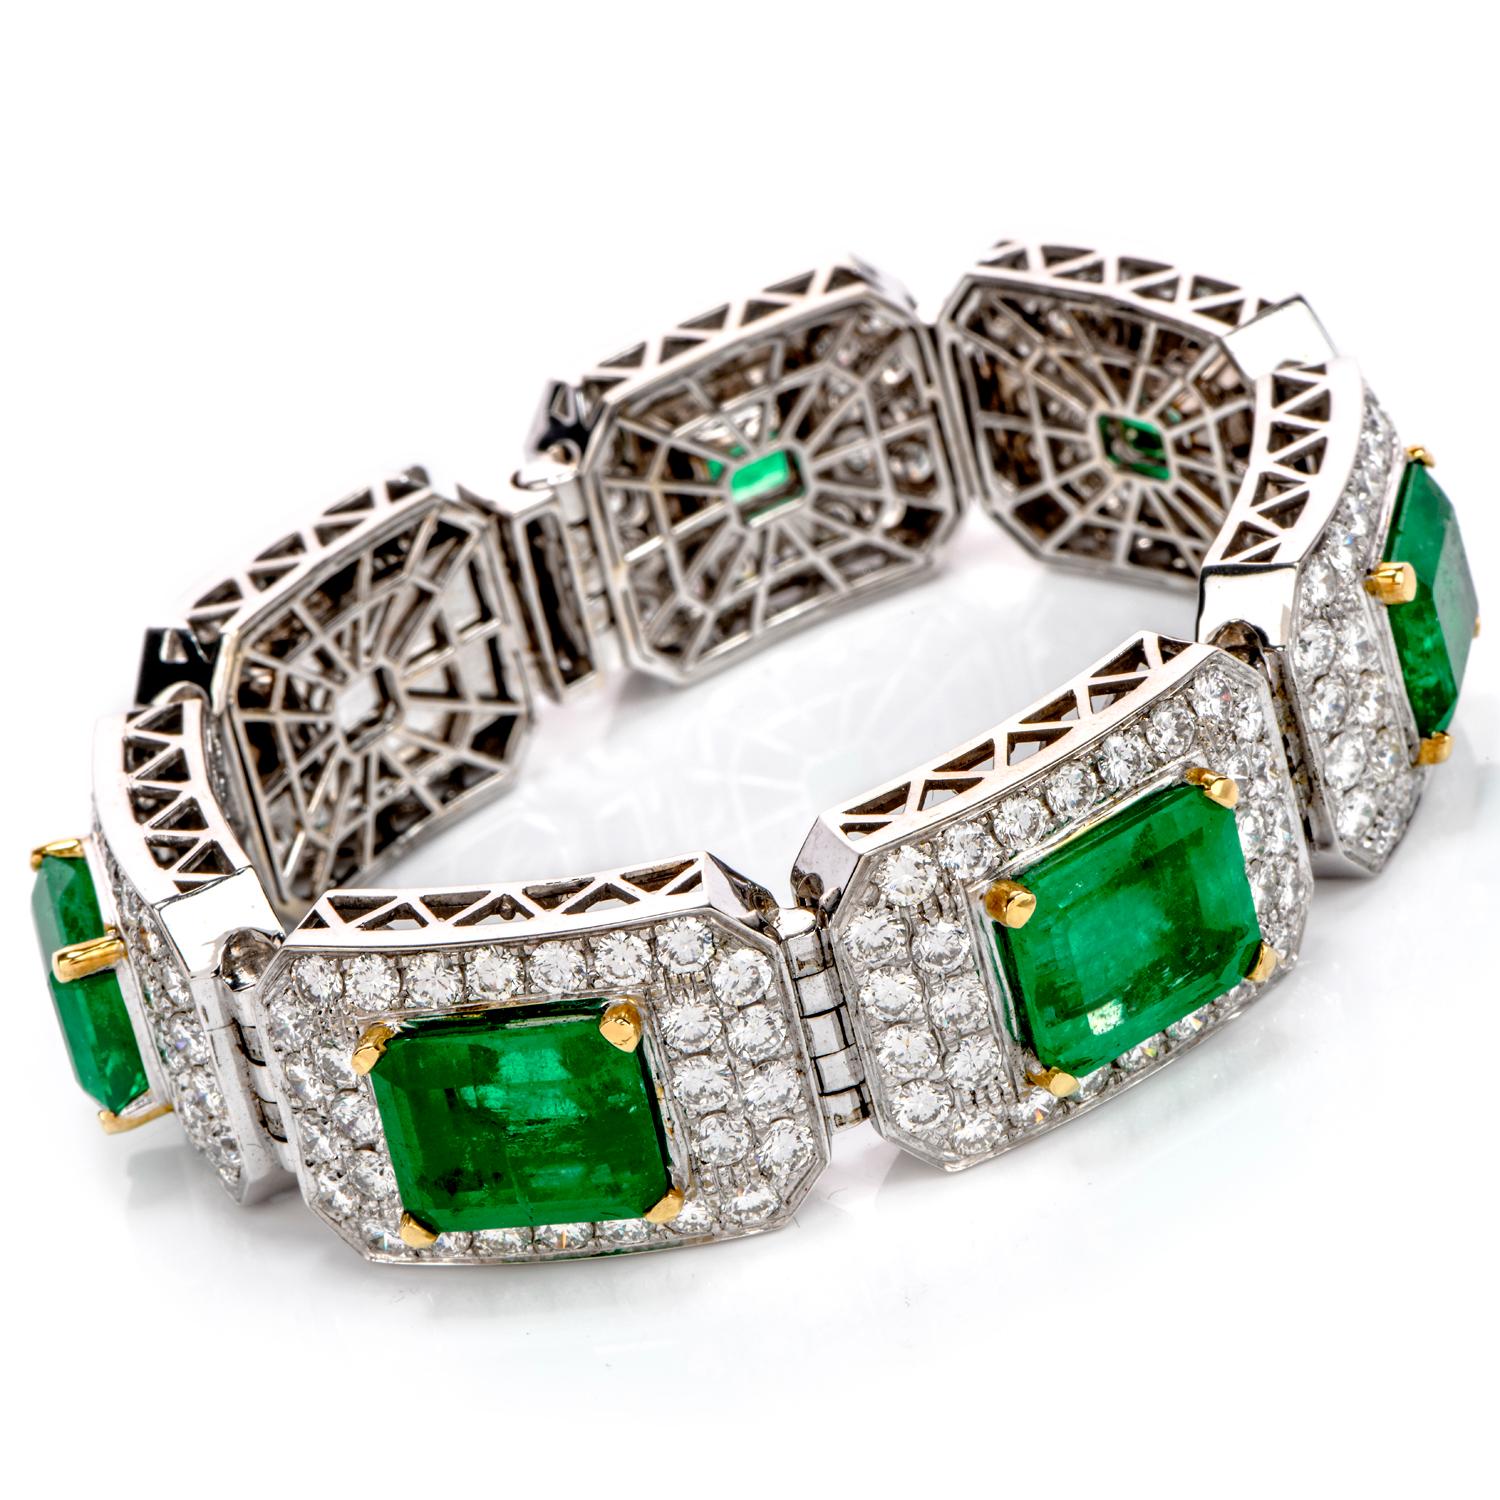 Your wrist will be decorated decadently with this large outstanding 44.20-Carat Colombian Emeralds & Diamond 18k White Gold Bracelet. 

This bracelet has 7 Emerald Cut, Bright Green & Transparent Colombian Emeralds set in 18K Yellow Gold Prongs.